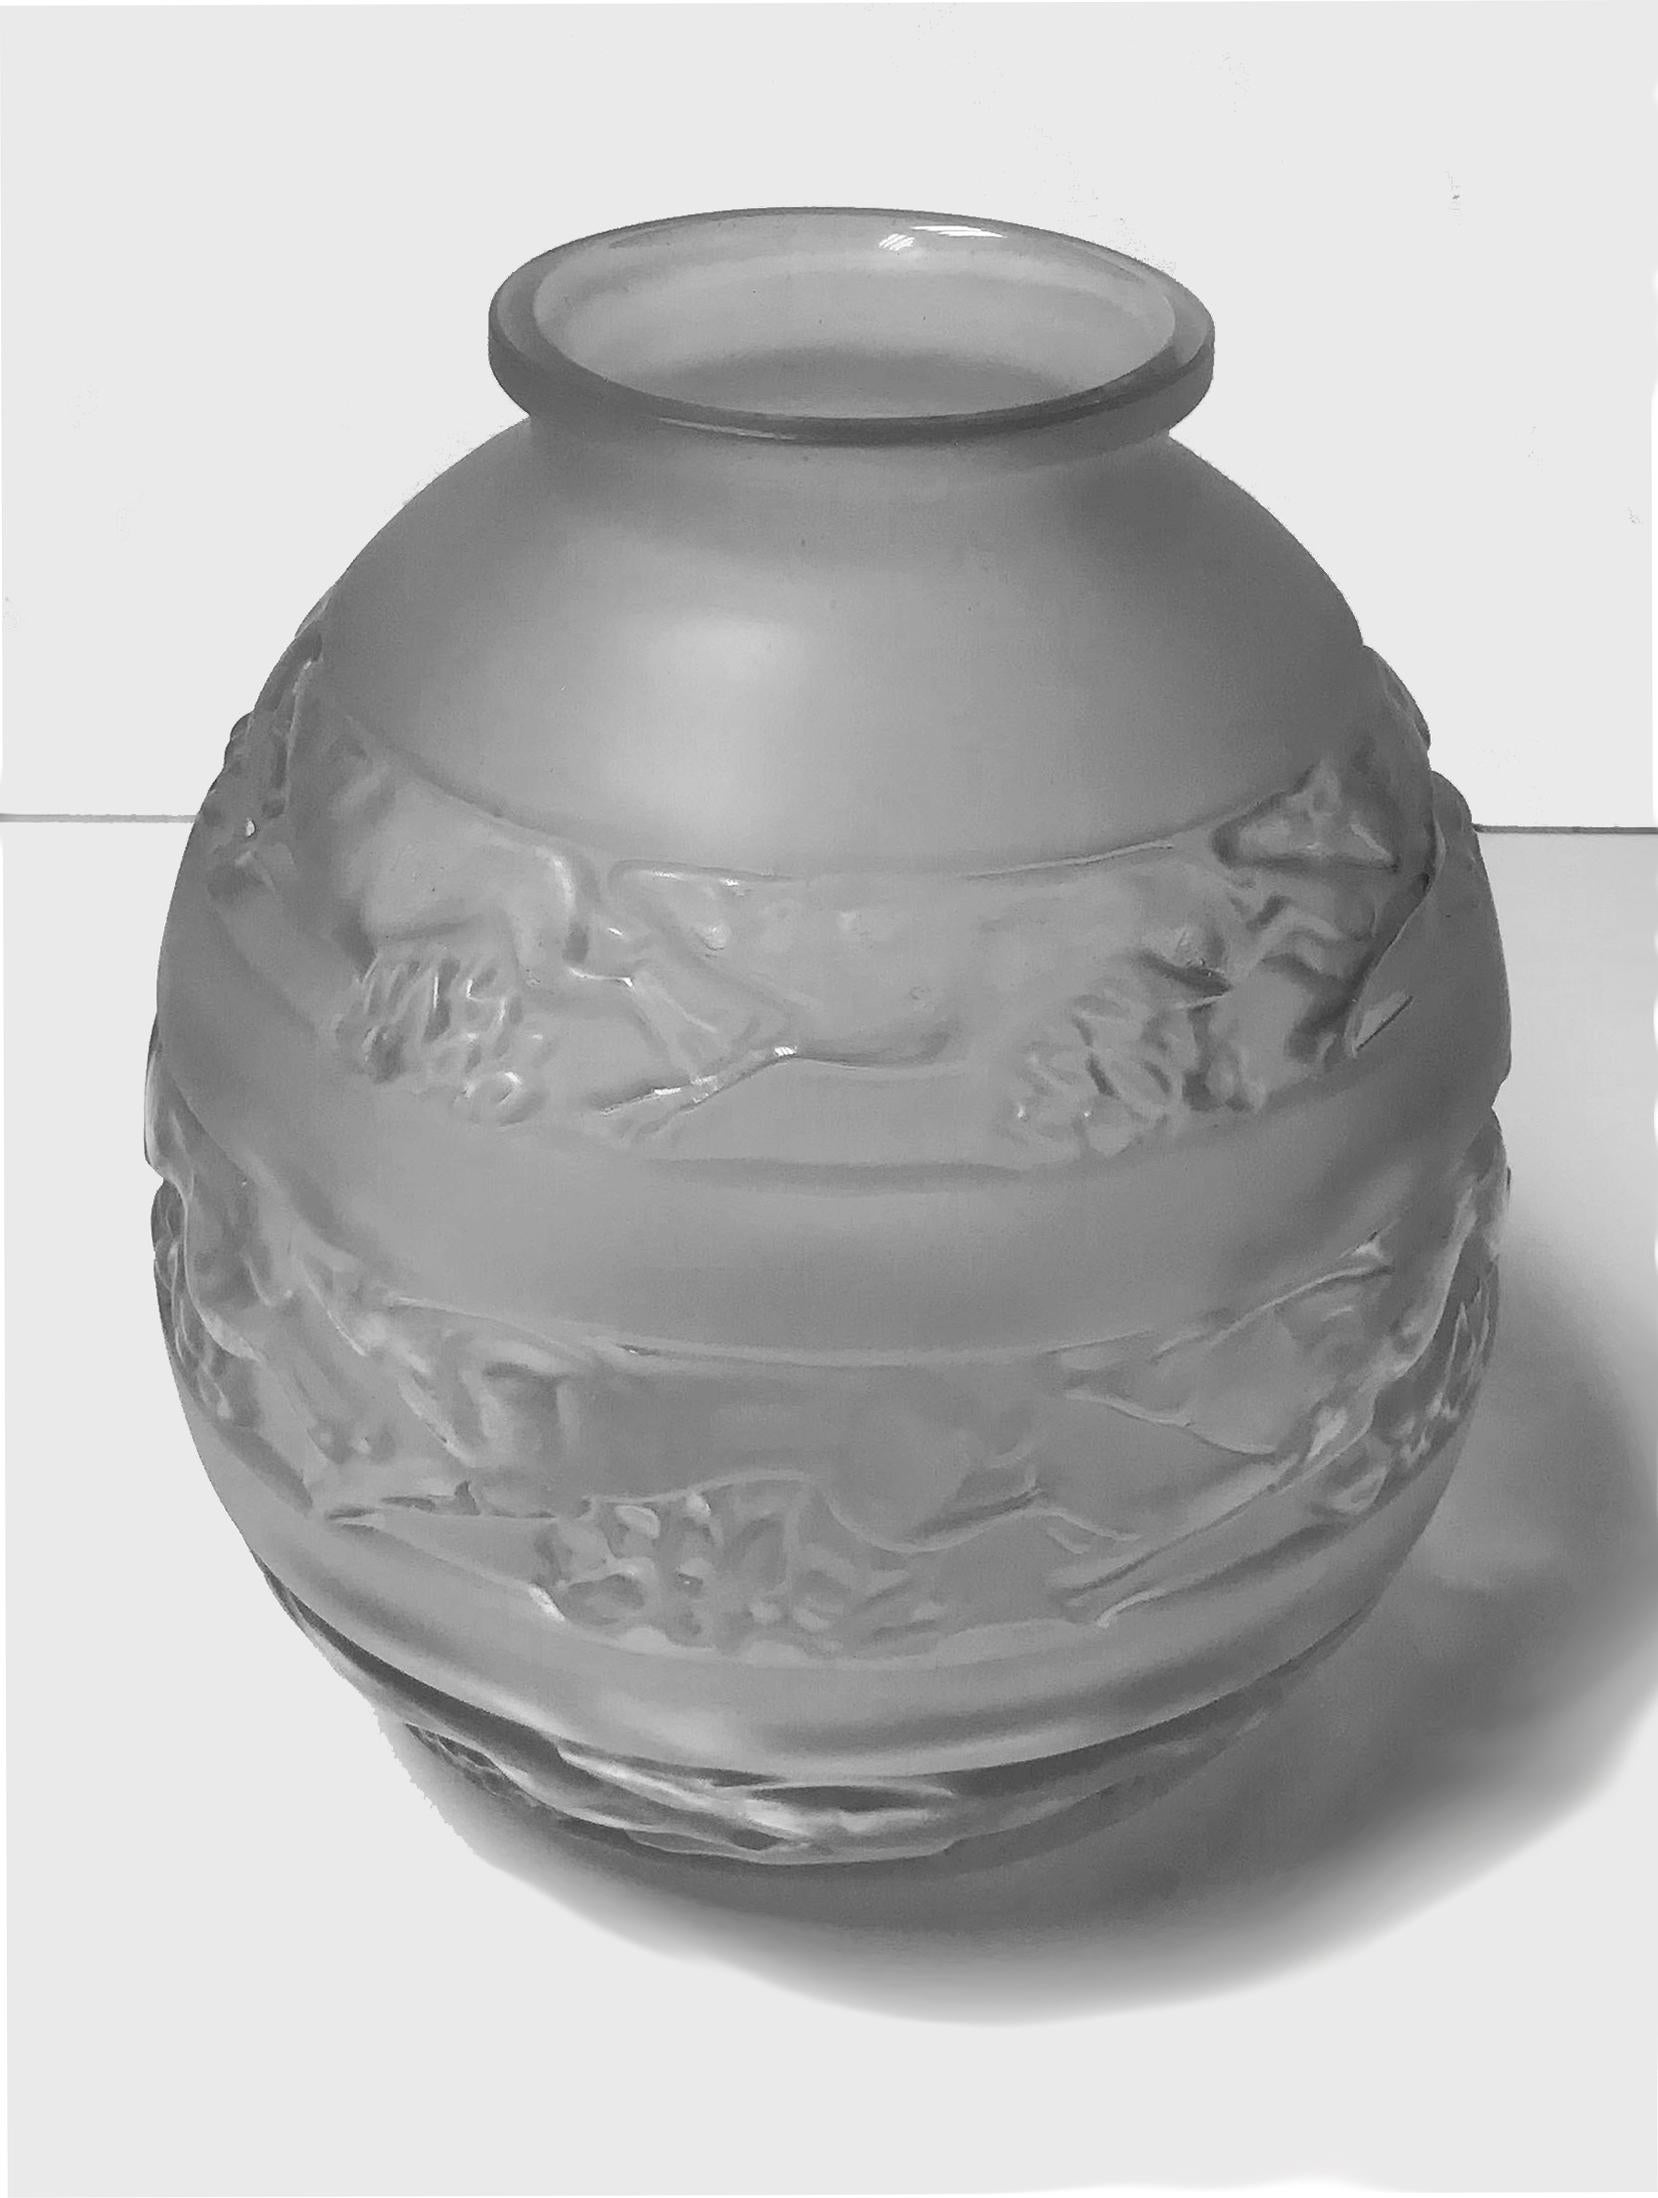 René Lalique (1860-1945) 1930s René Lalique signed vase. Pattern Soudan, three bands of gazelles mold blown clear frosted satin glass. Signed R. Lalique. Measures: Height 18.25cm. Condition: Good.